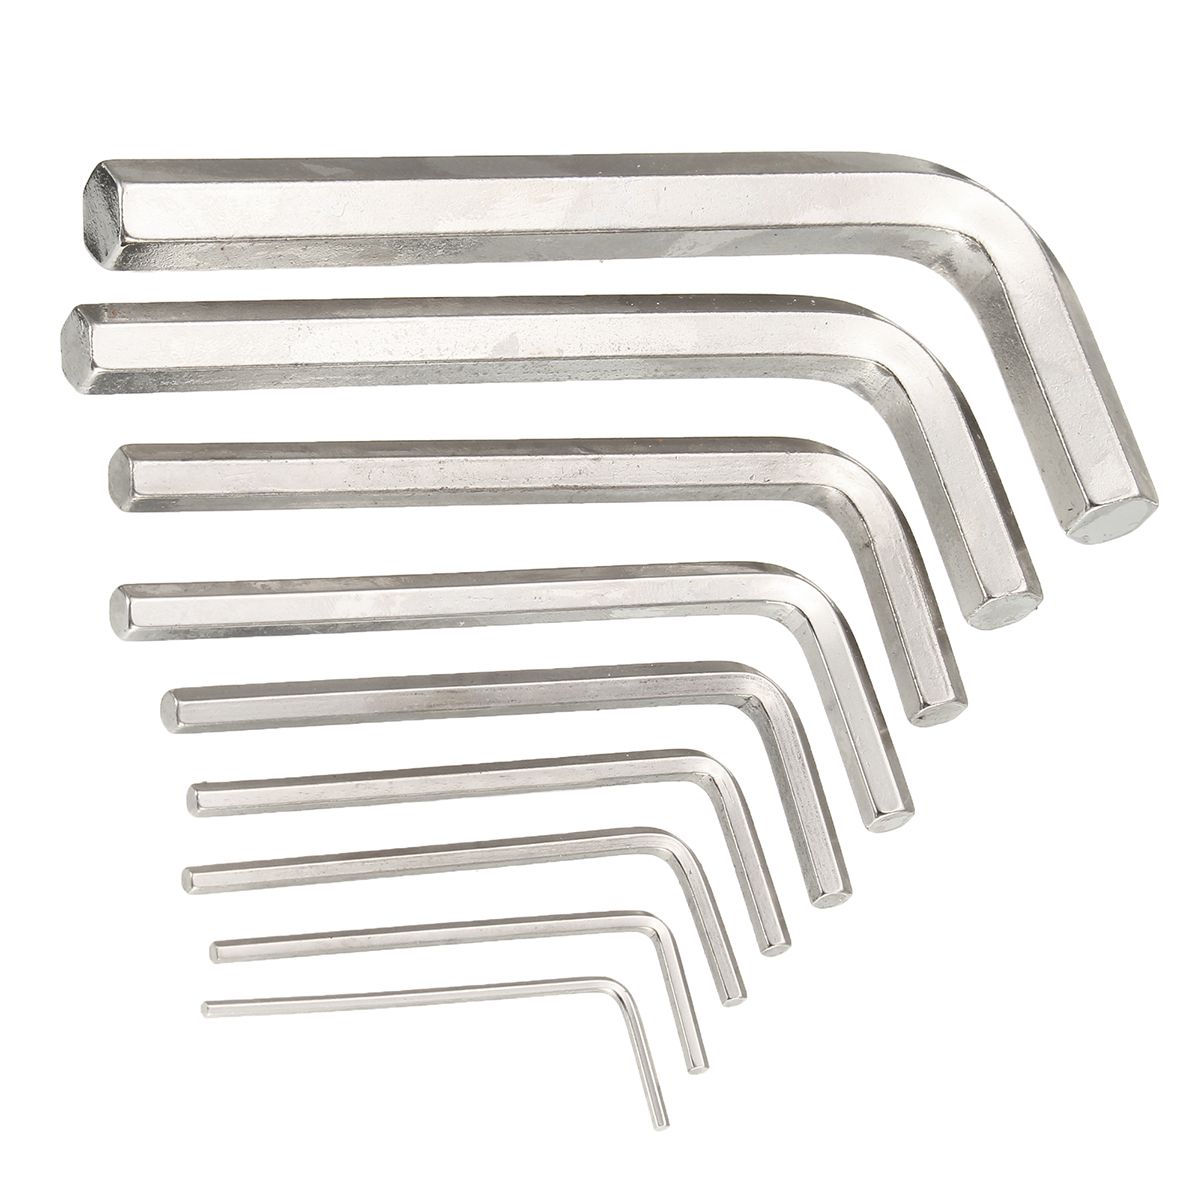 8Pcs-Metric-Combination-Hex-Key-Allen-Wrench-Set-15mm-to-10mm-Key-Hand-Tool-1128964